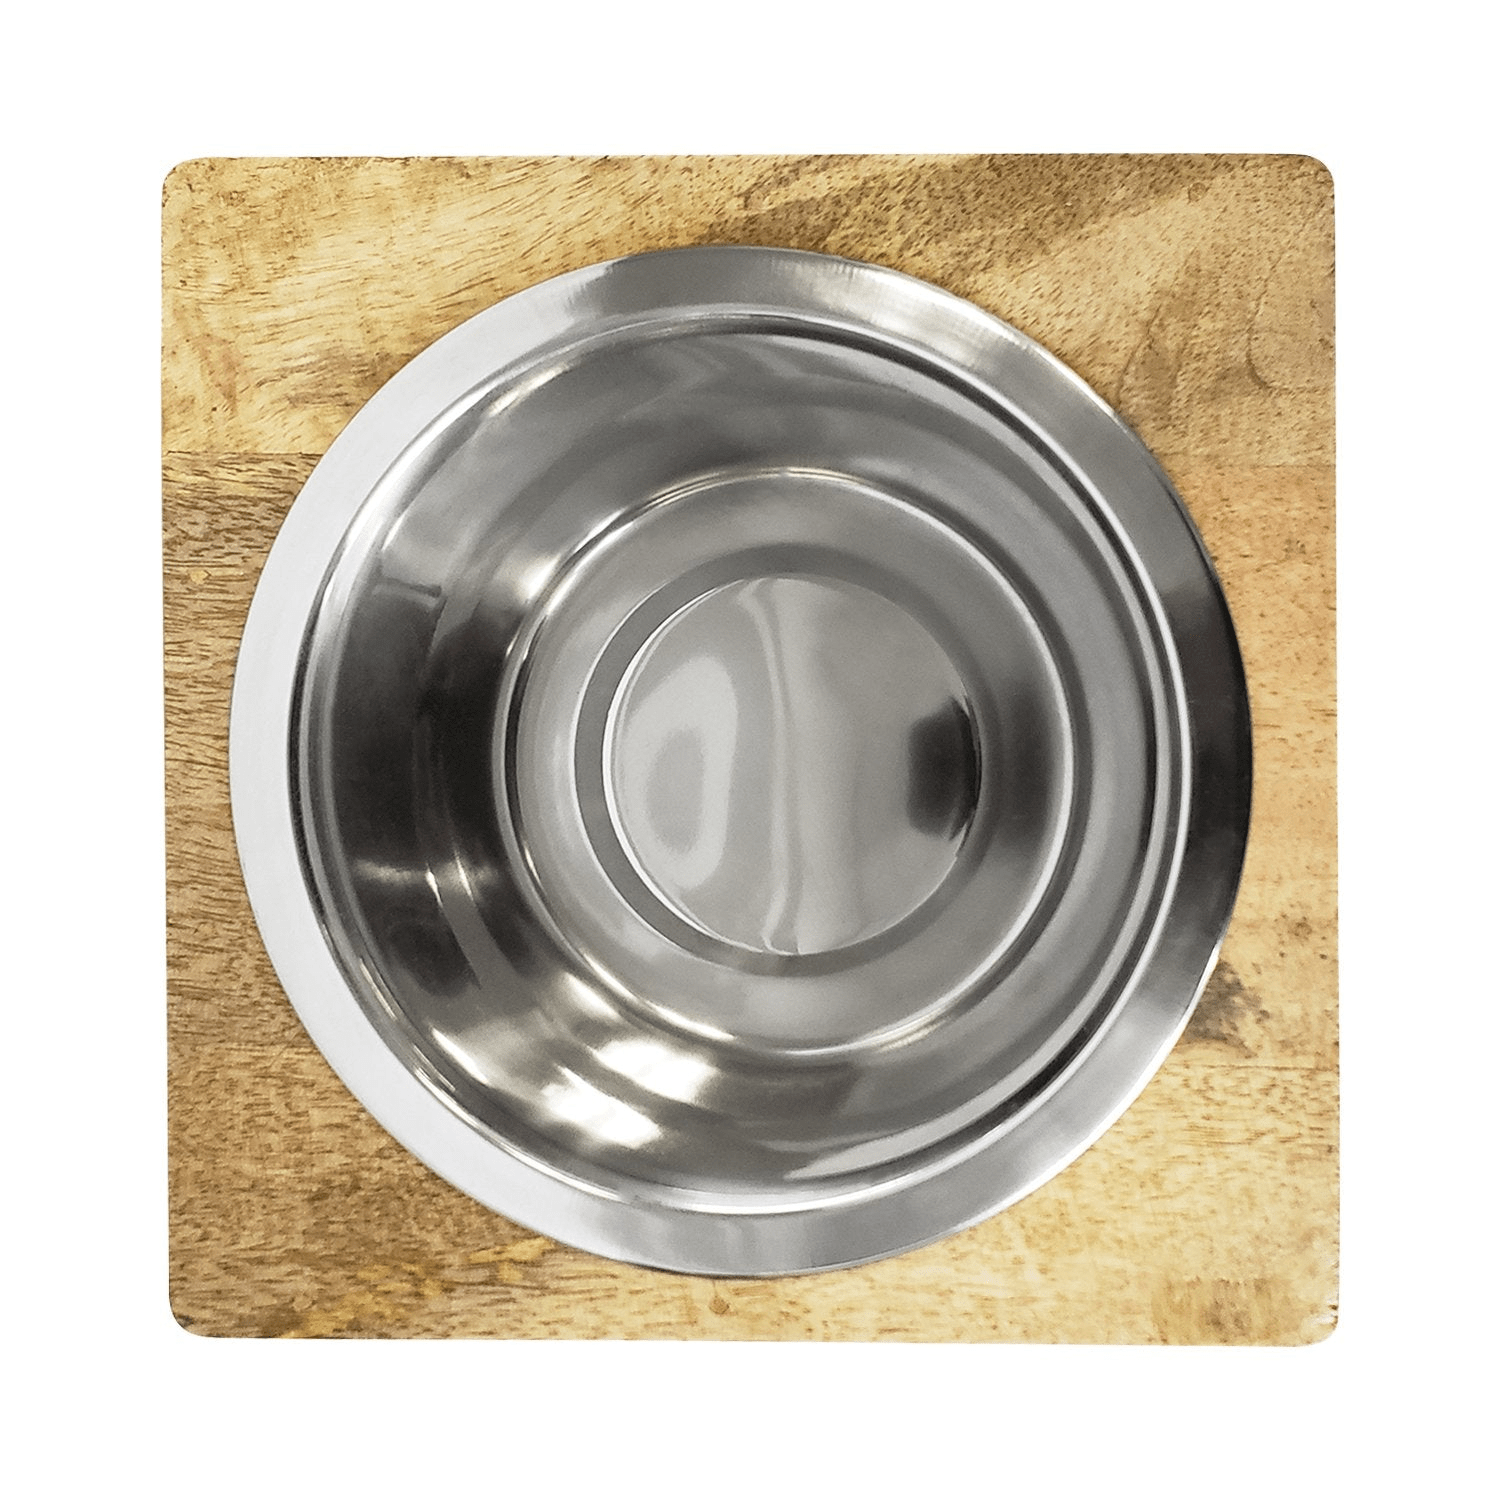 Dog and Pet Stuff Default Stainless Steel Dog Bowl with Square Mango Wood Holder